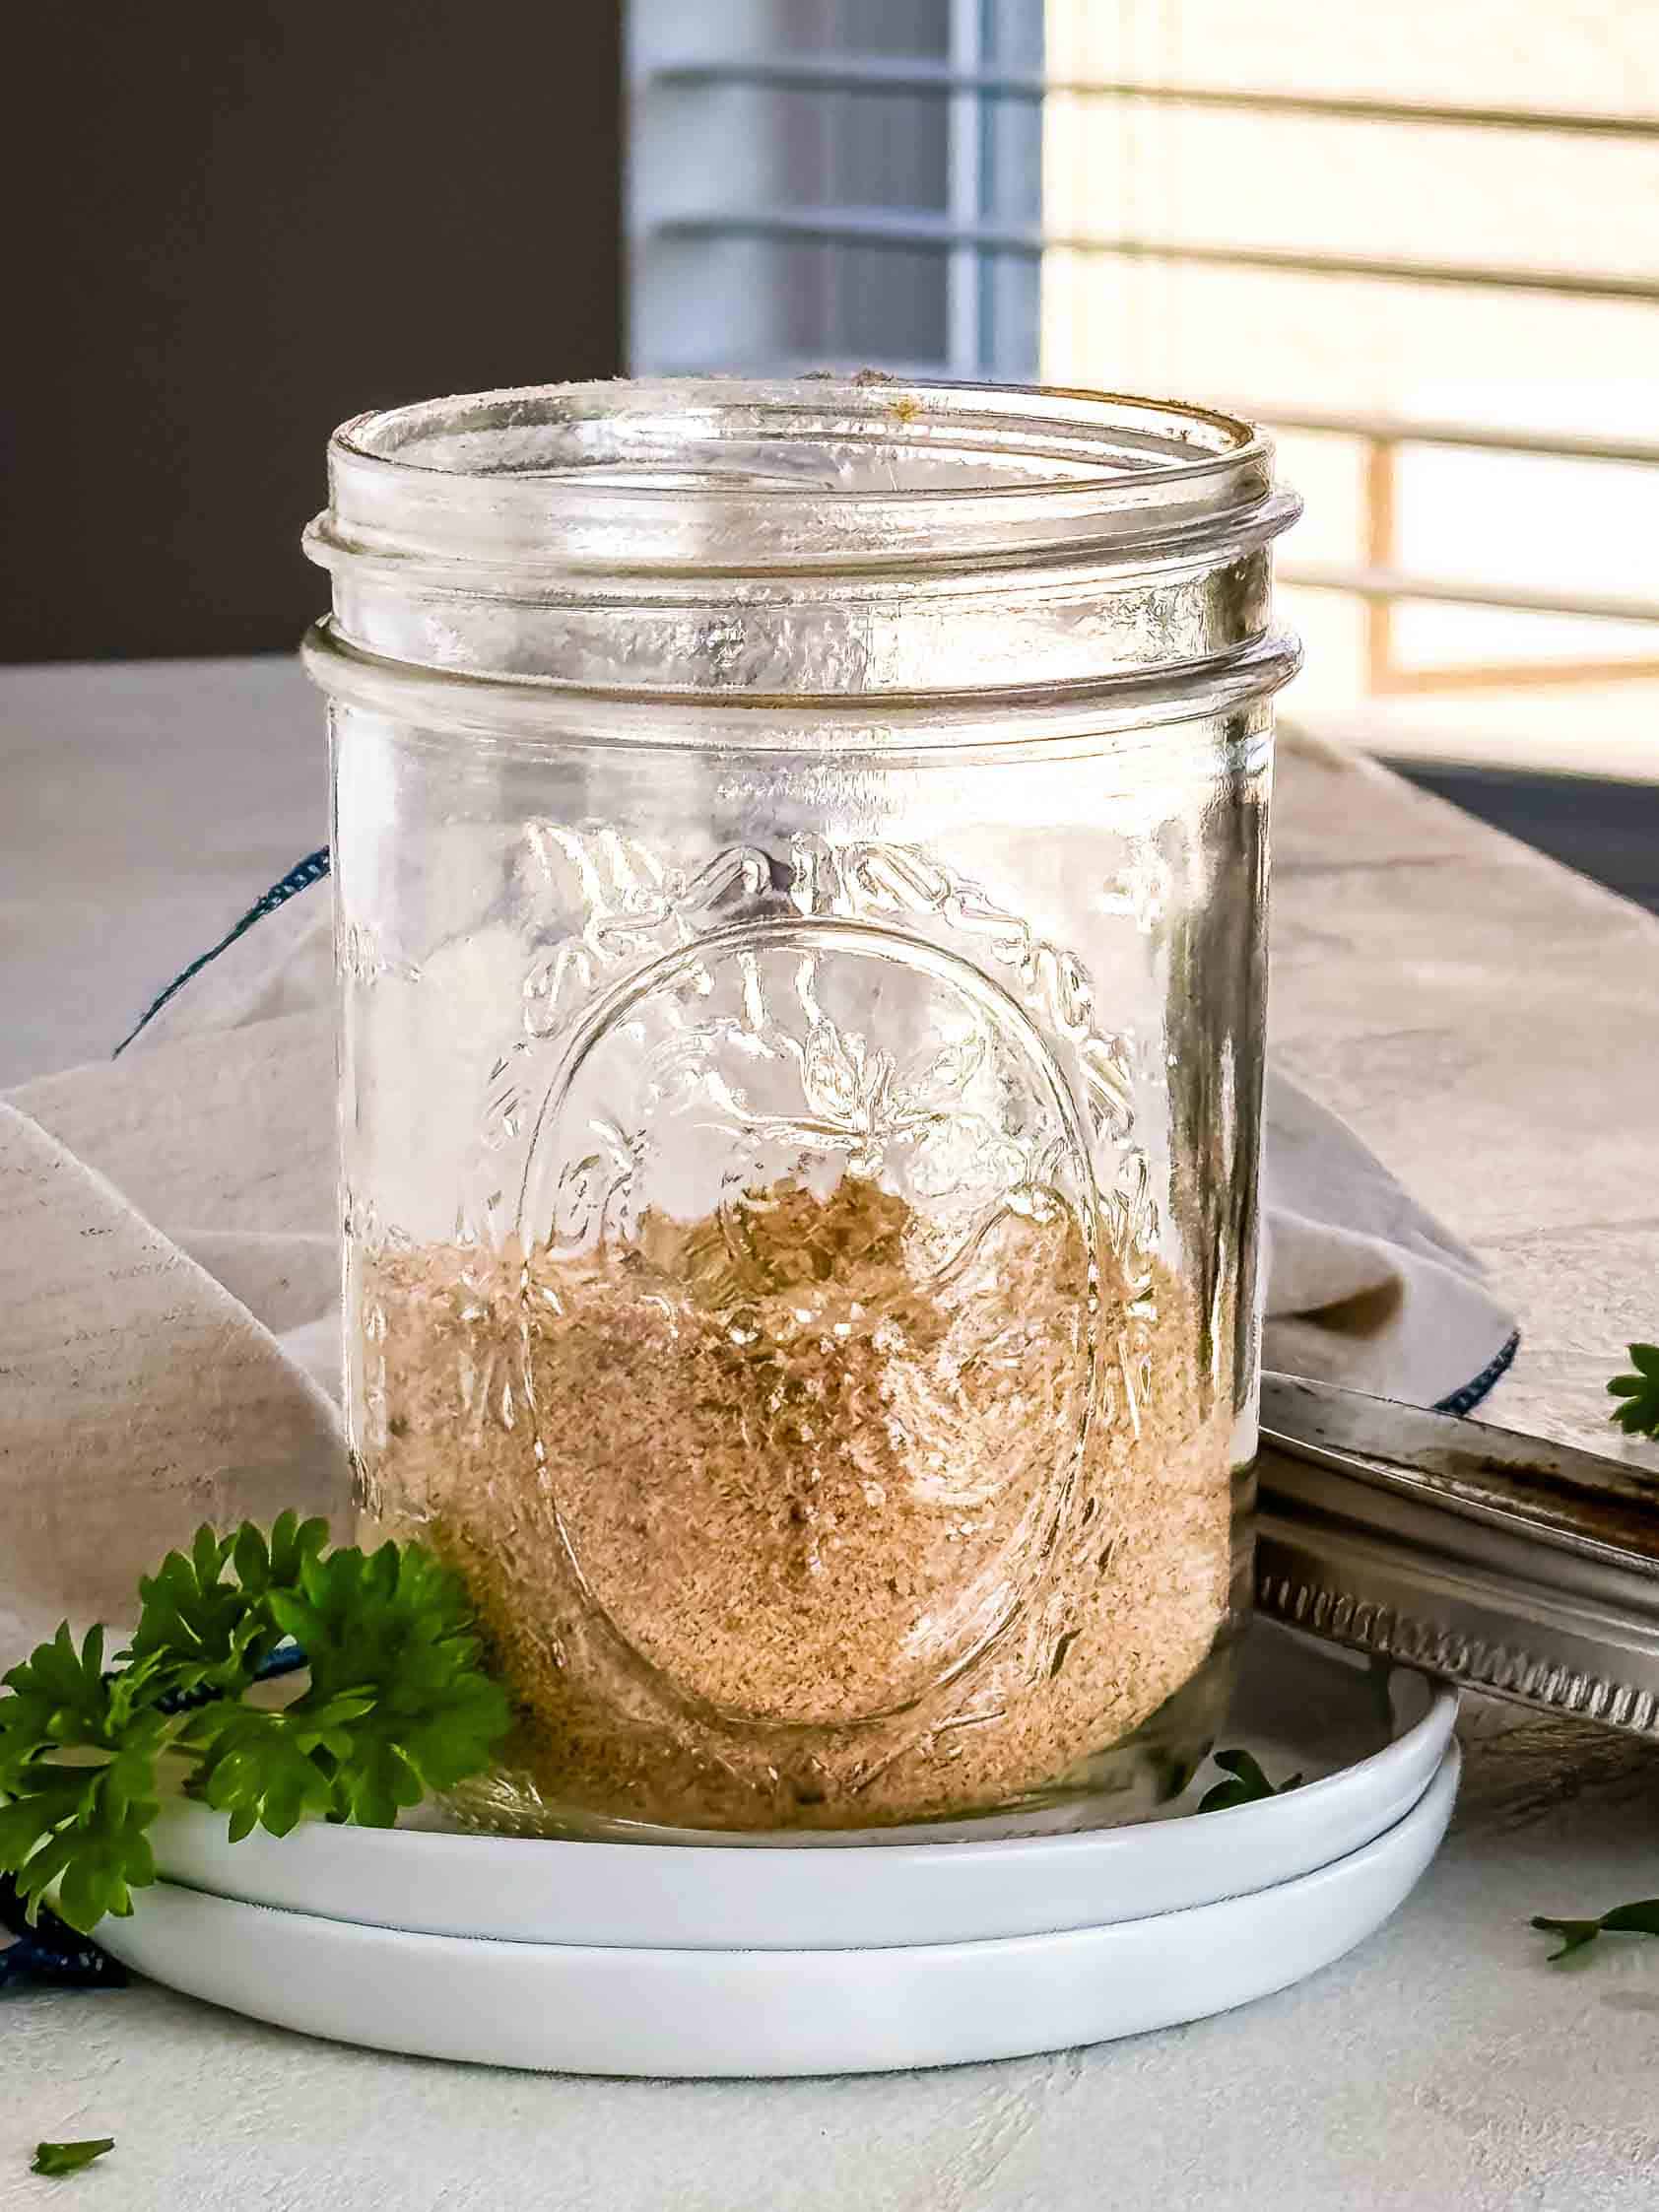 A close-up of homemade seasoned salt in a glass mason jar, with parsley and a cloth napkin nearby.